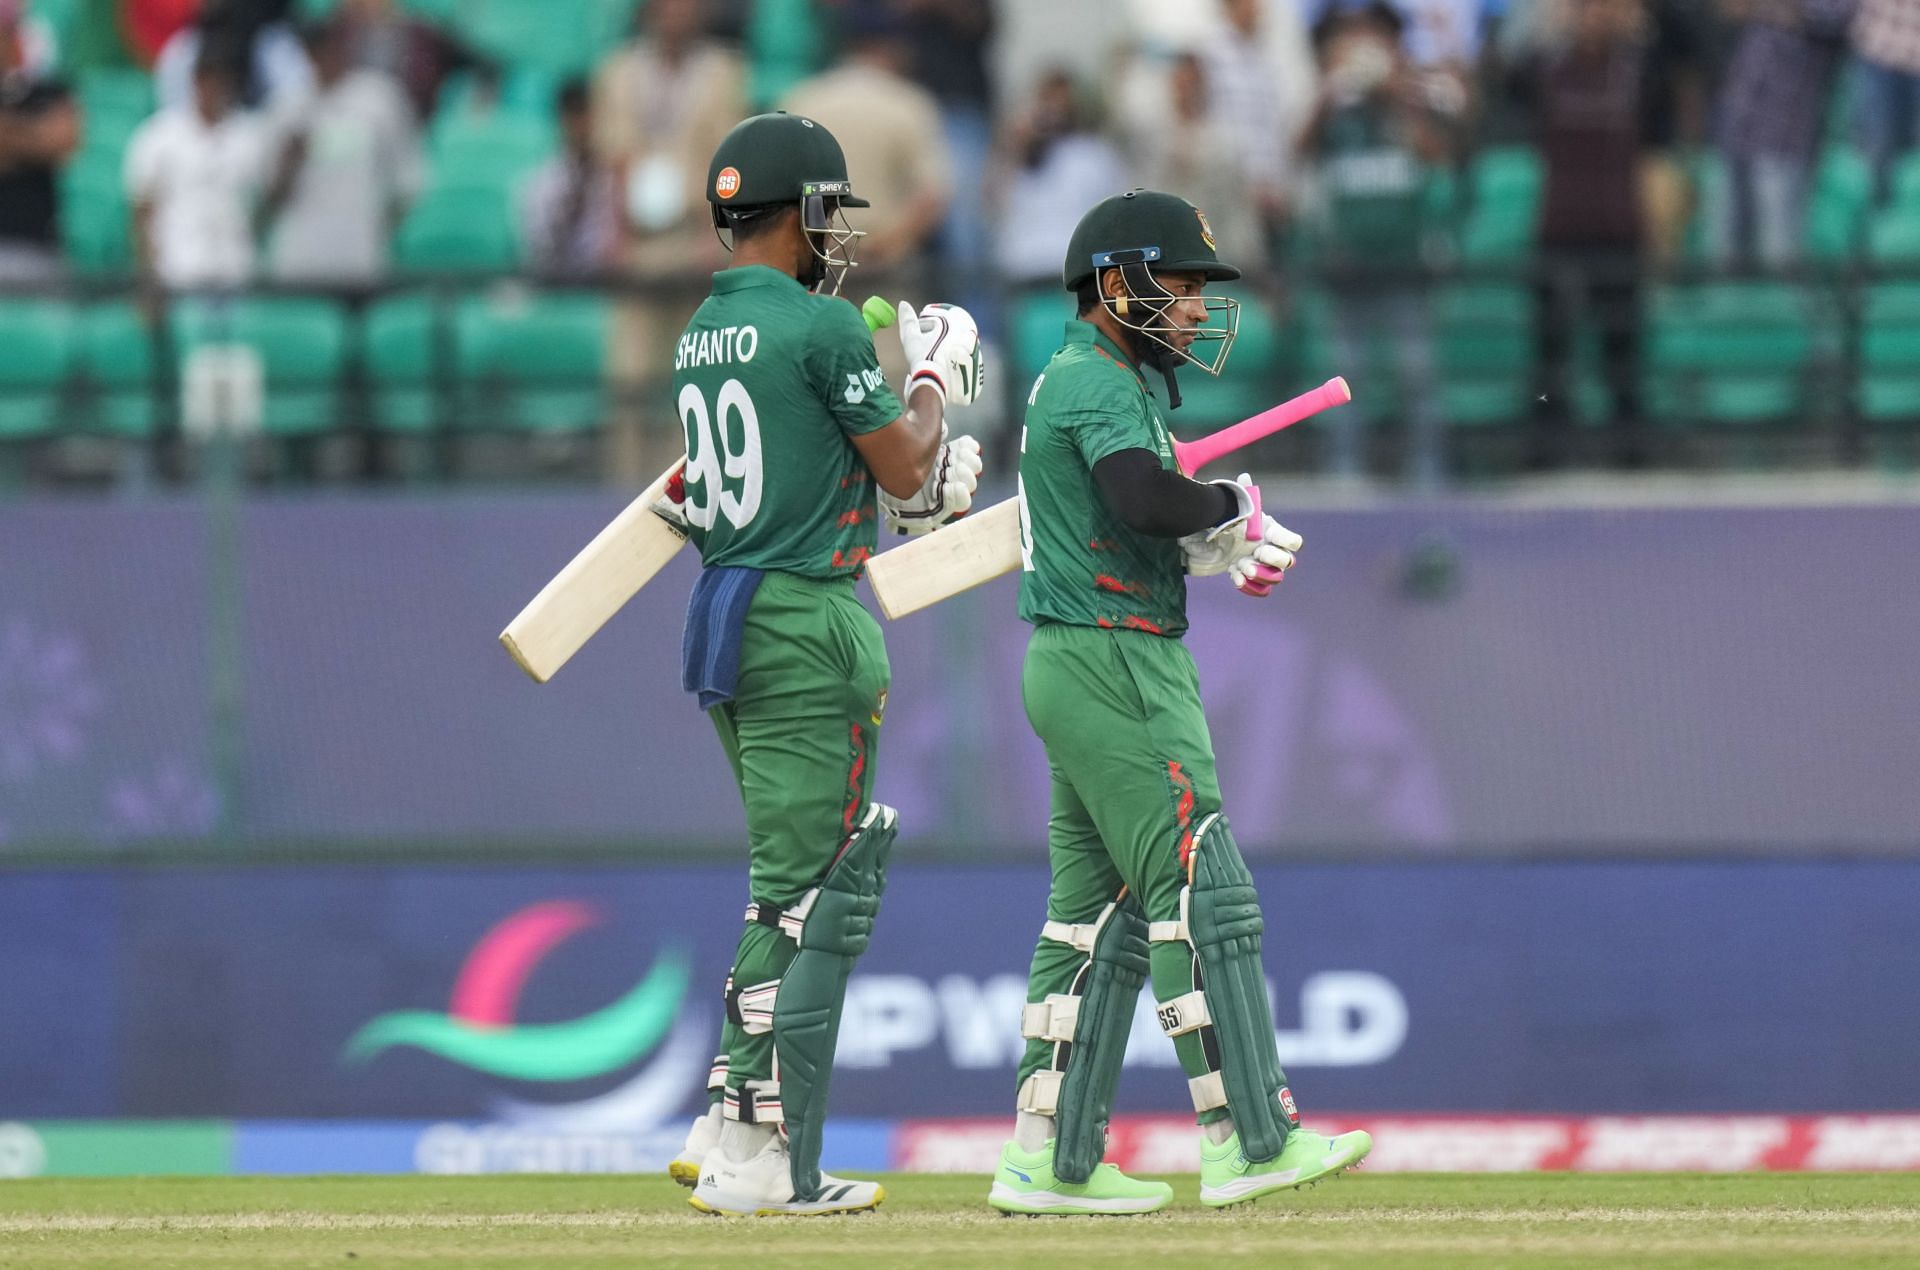 Bangladesh registered a convincing win in their World Cup opener against Afghanistan. [P/C: AP]